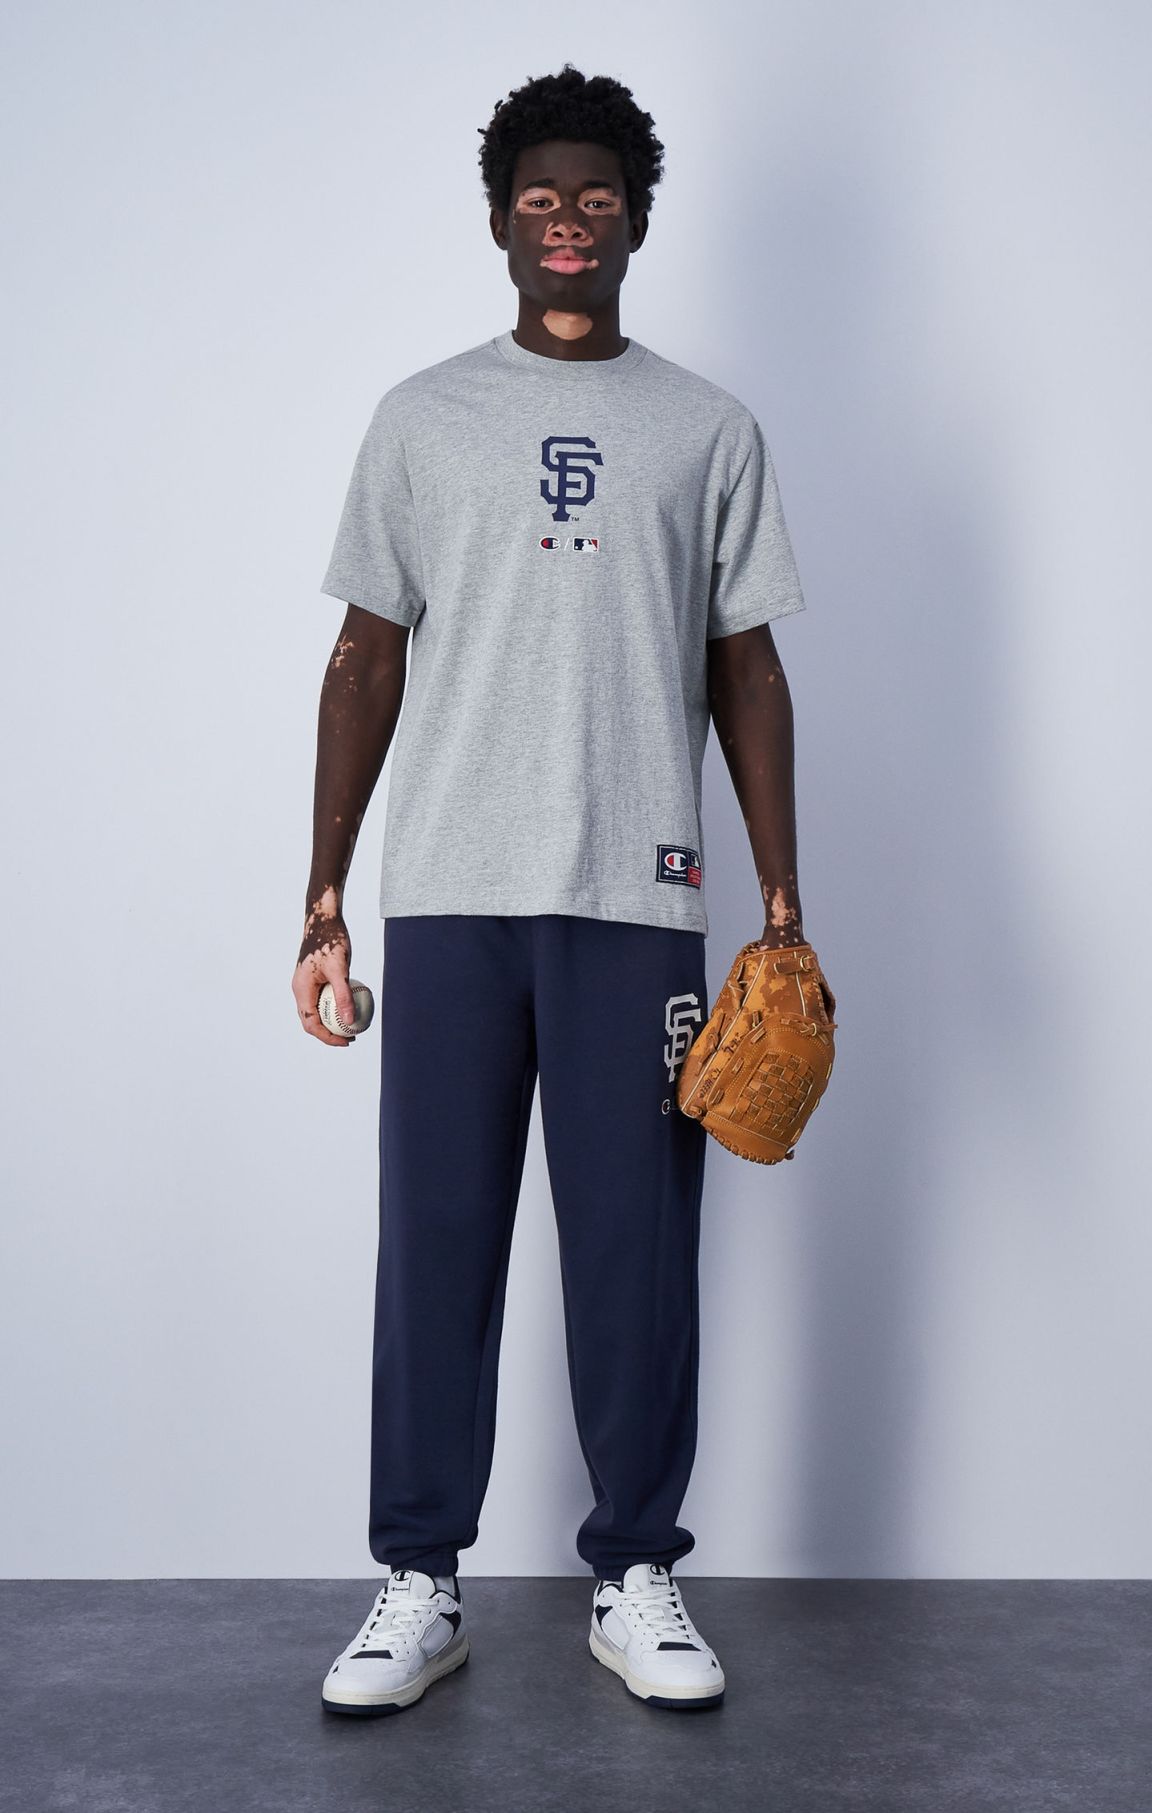 Bestickte MLB-Jogginghose aus French Terry